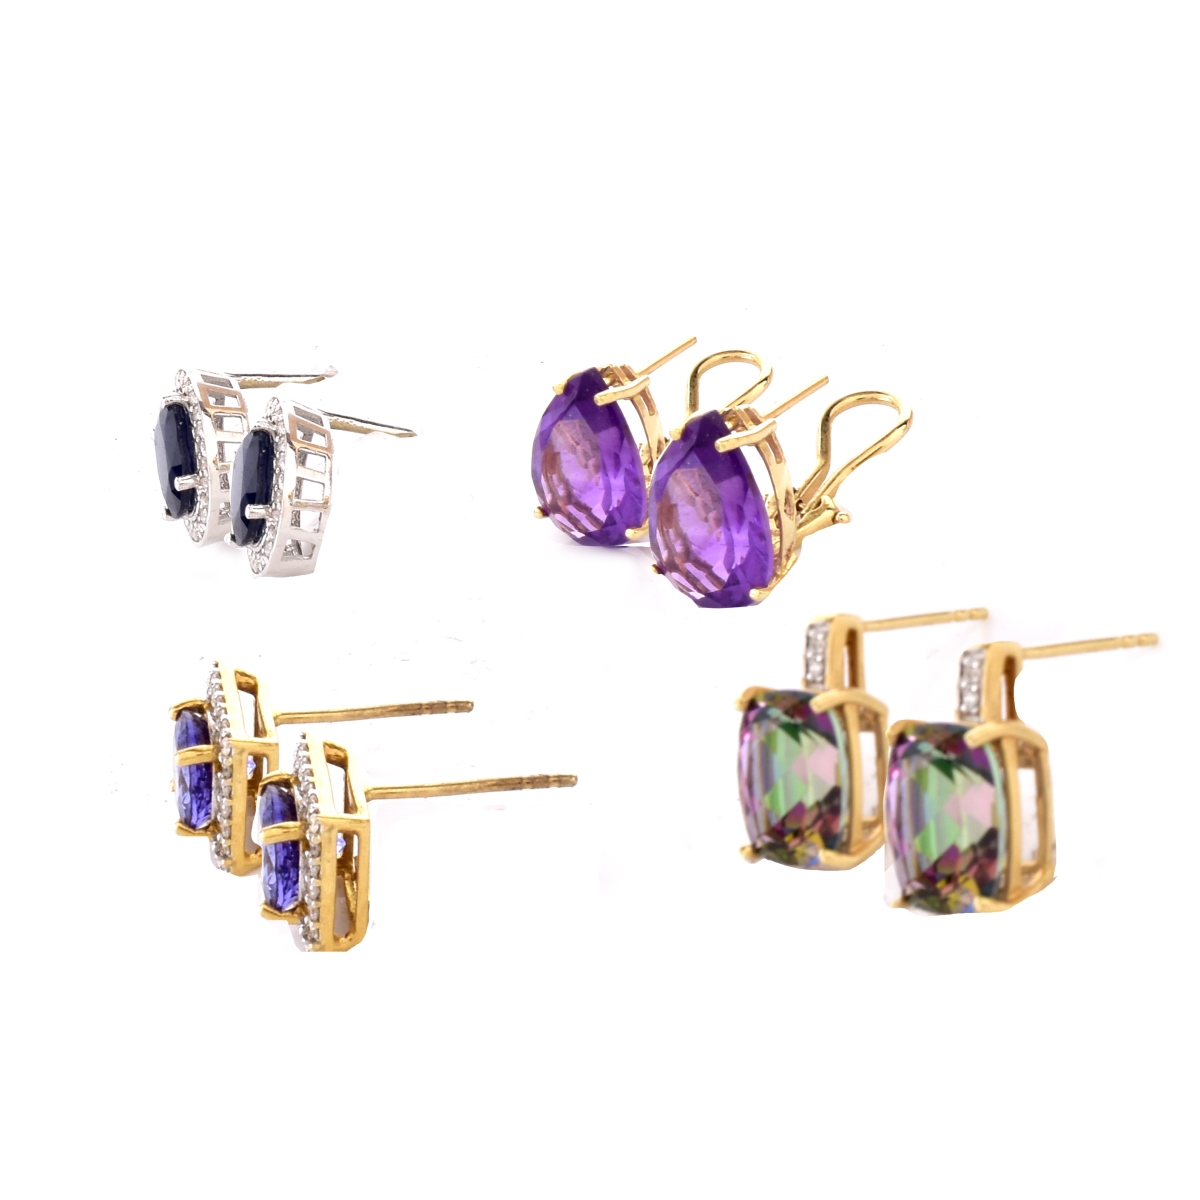 Four Pair Gemstone and Gold Earrings